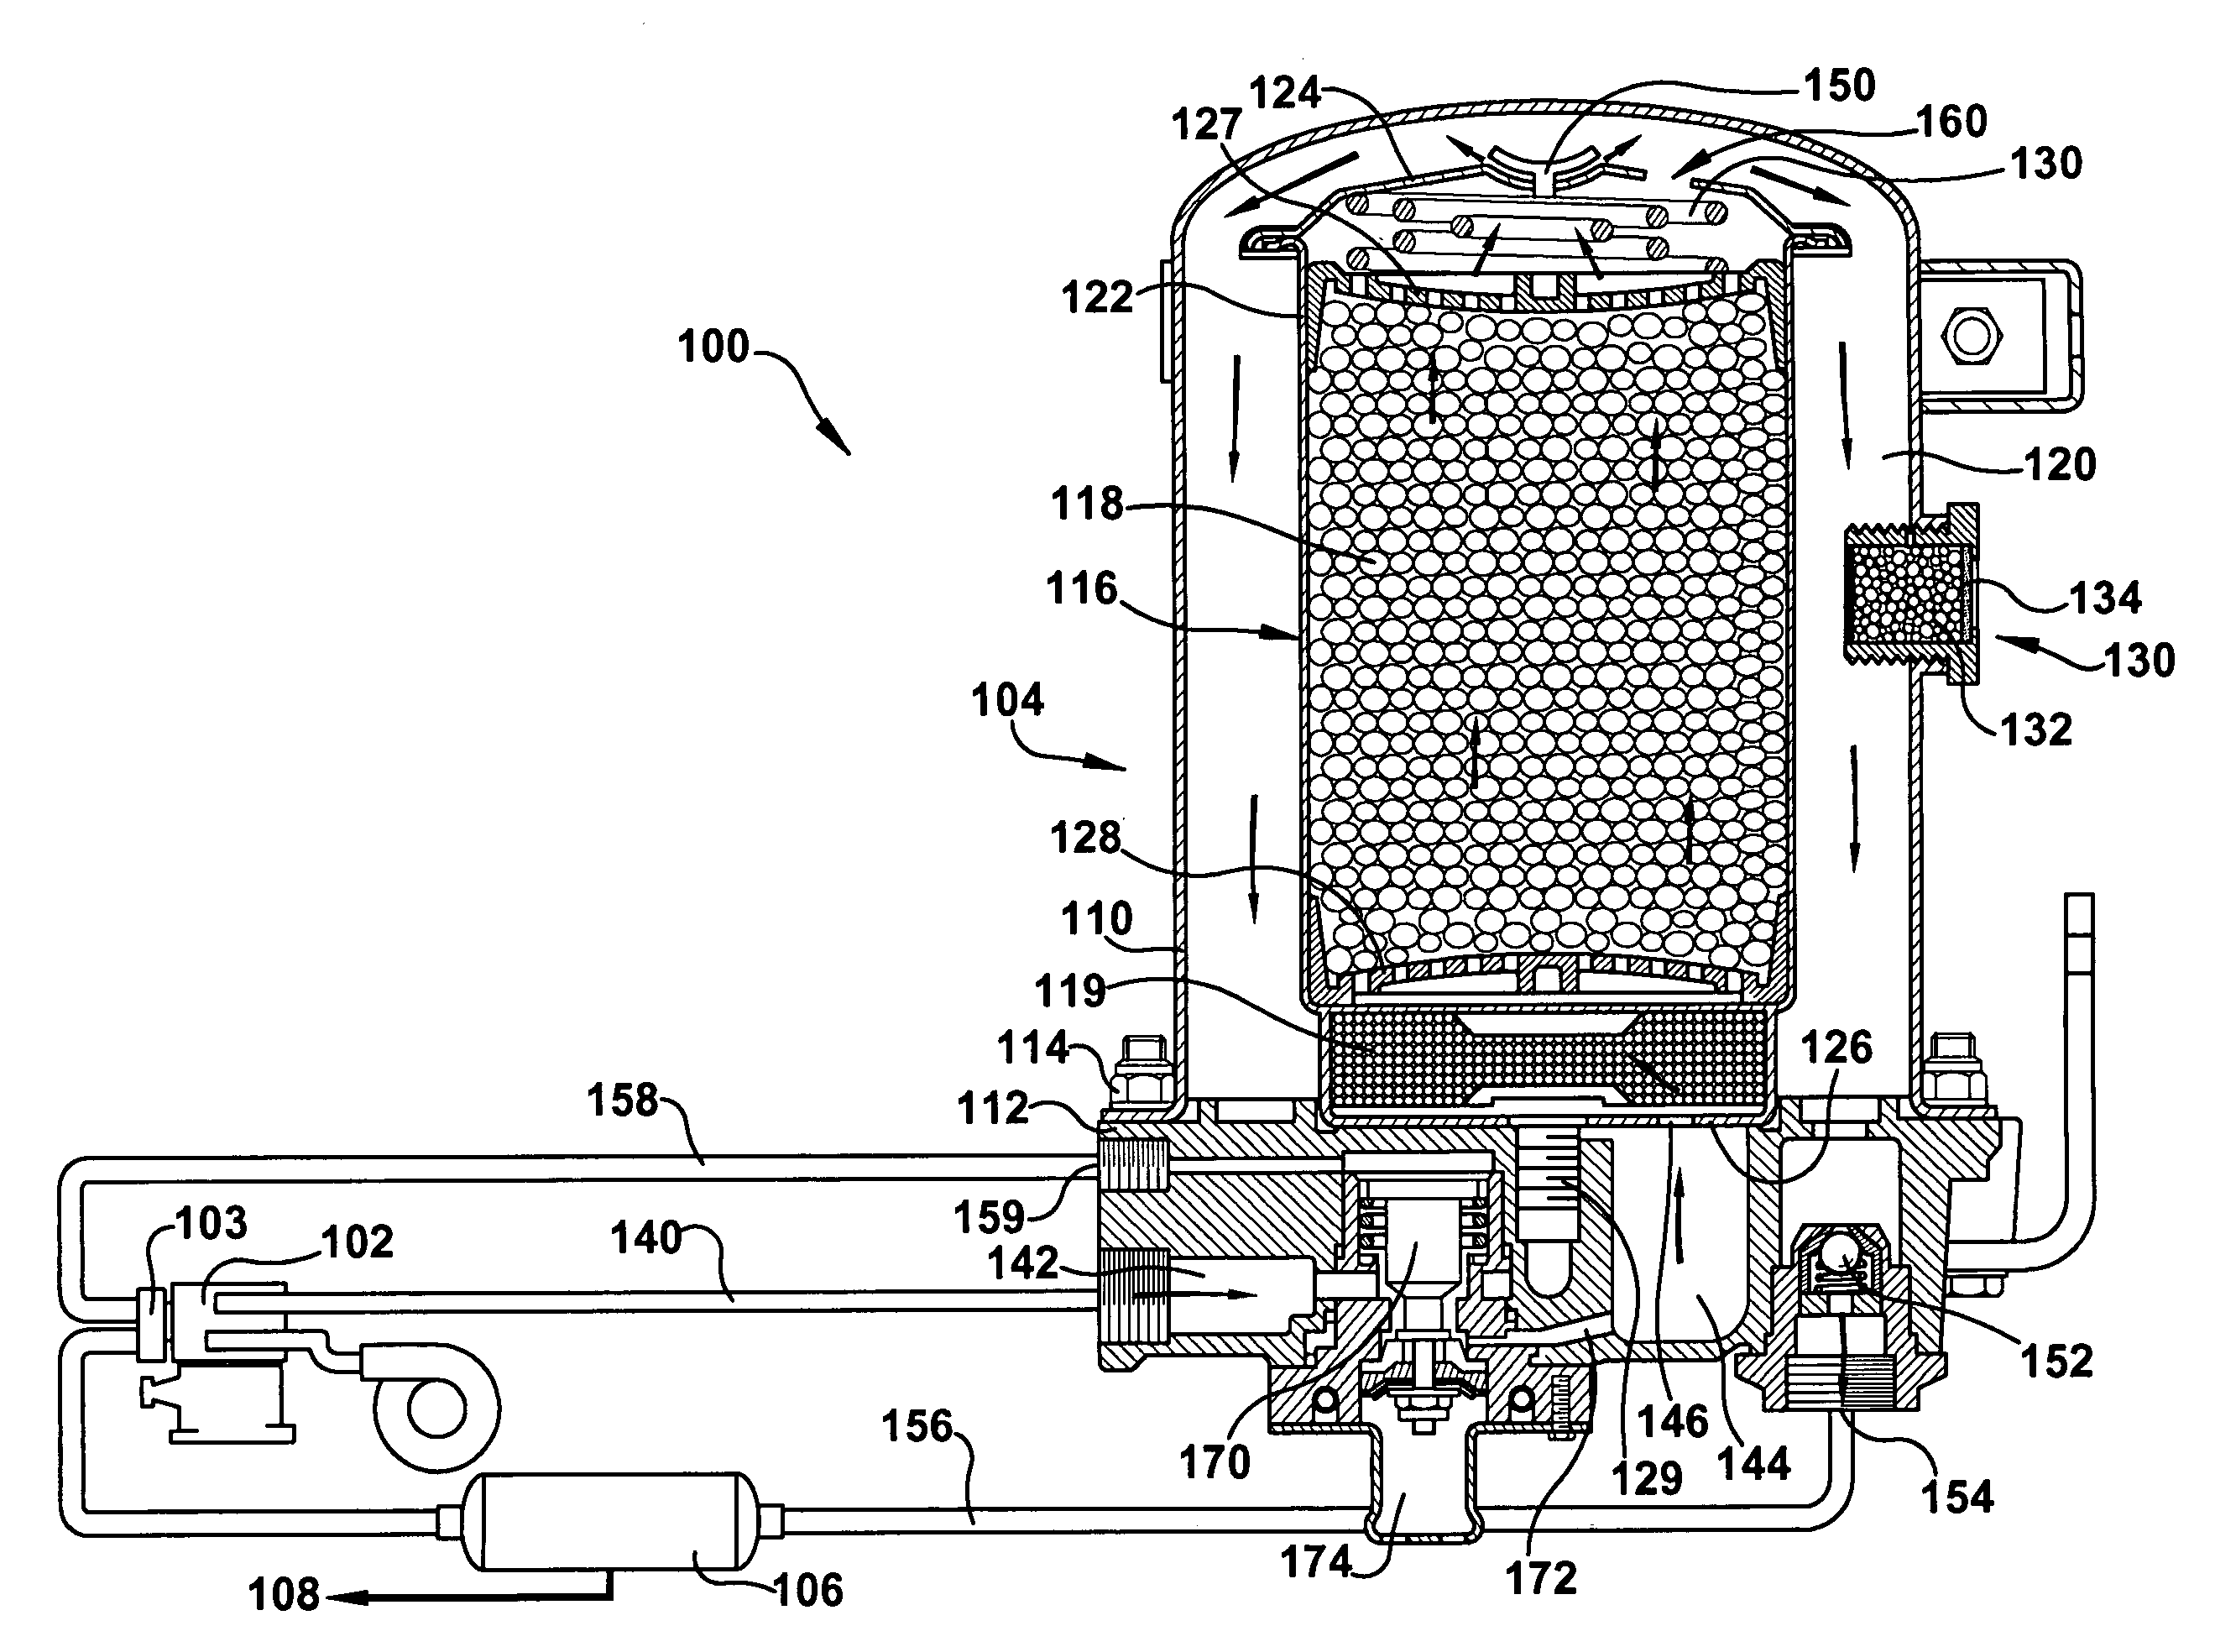 Vehicle air system having an indicator device and method